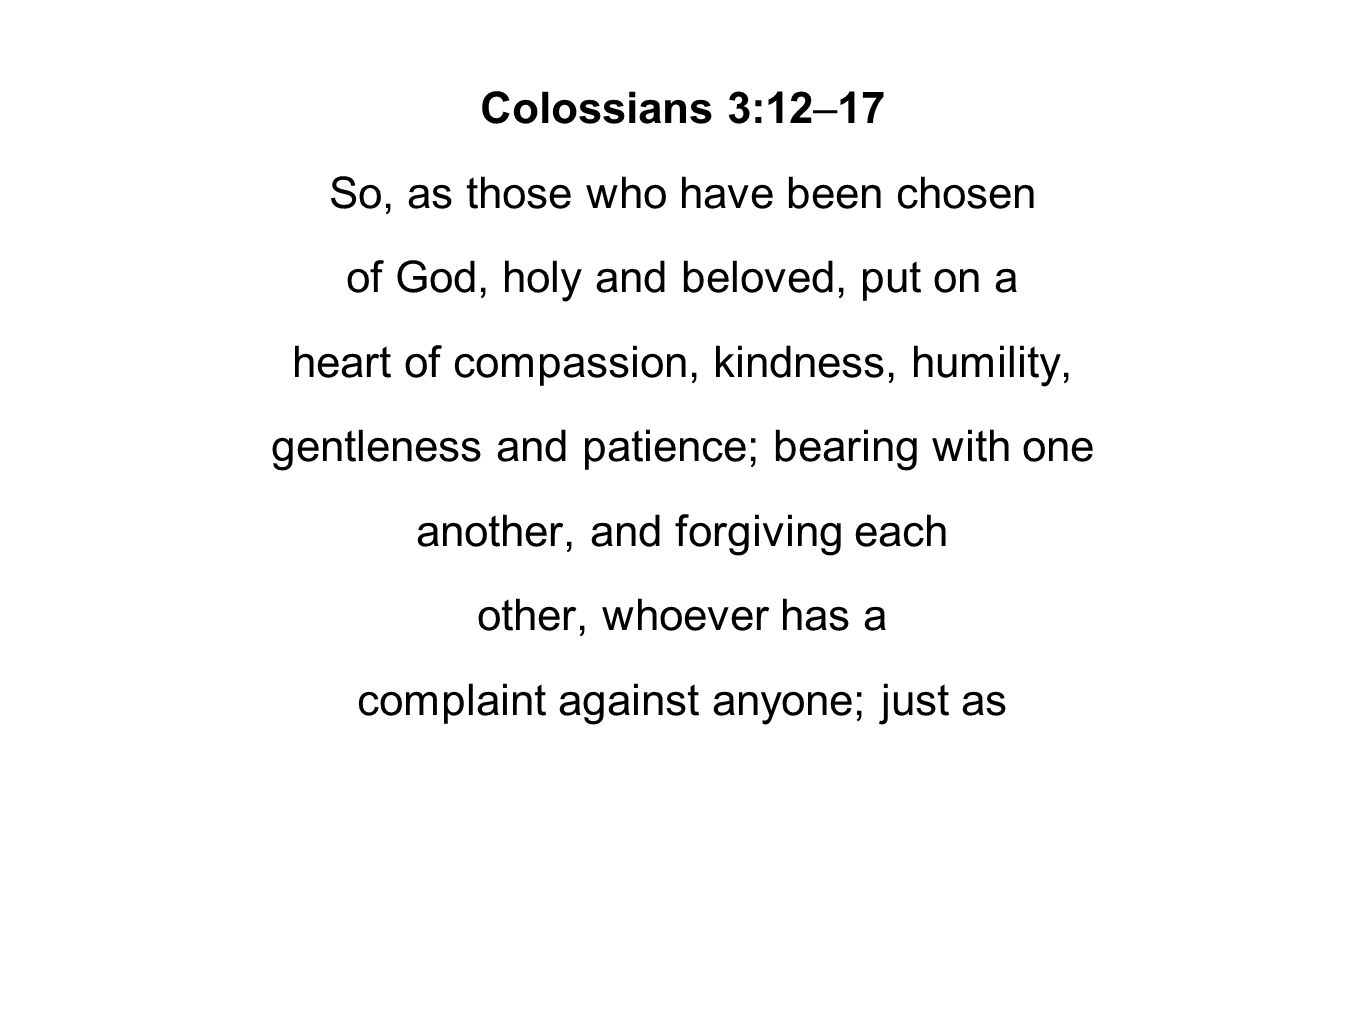 Colossians 3:12–17 So, as those who have been chosen of God, holy and beloved, put on a heart of compassion, kindness, humility, gentleness and patience; bearing with one another, and forgiving each other, whoever has a complaint against anyone; just as